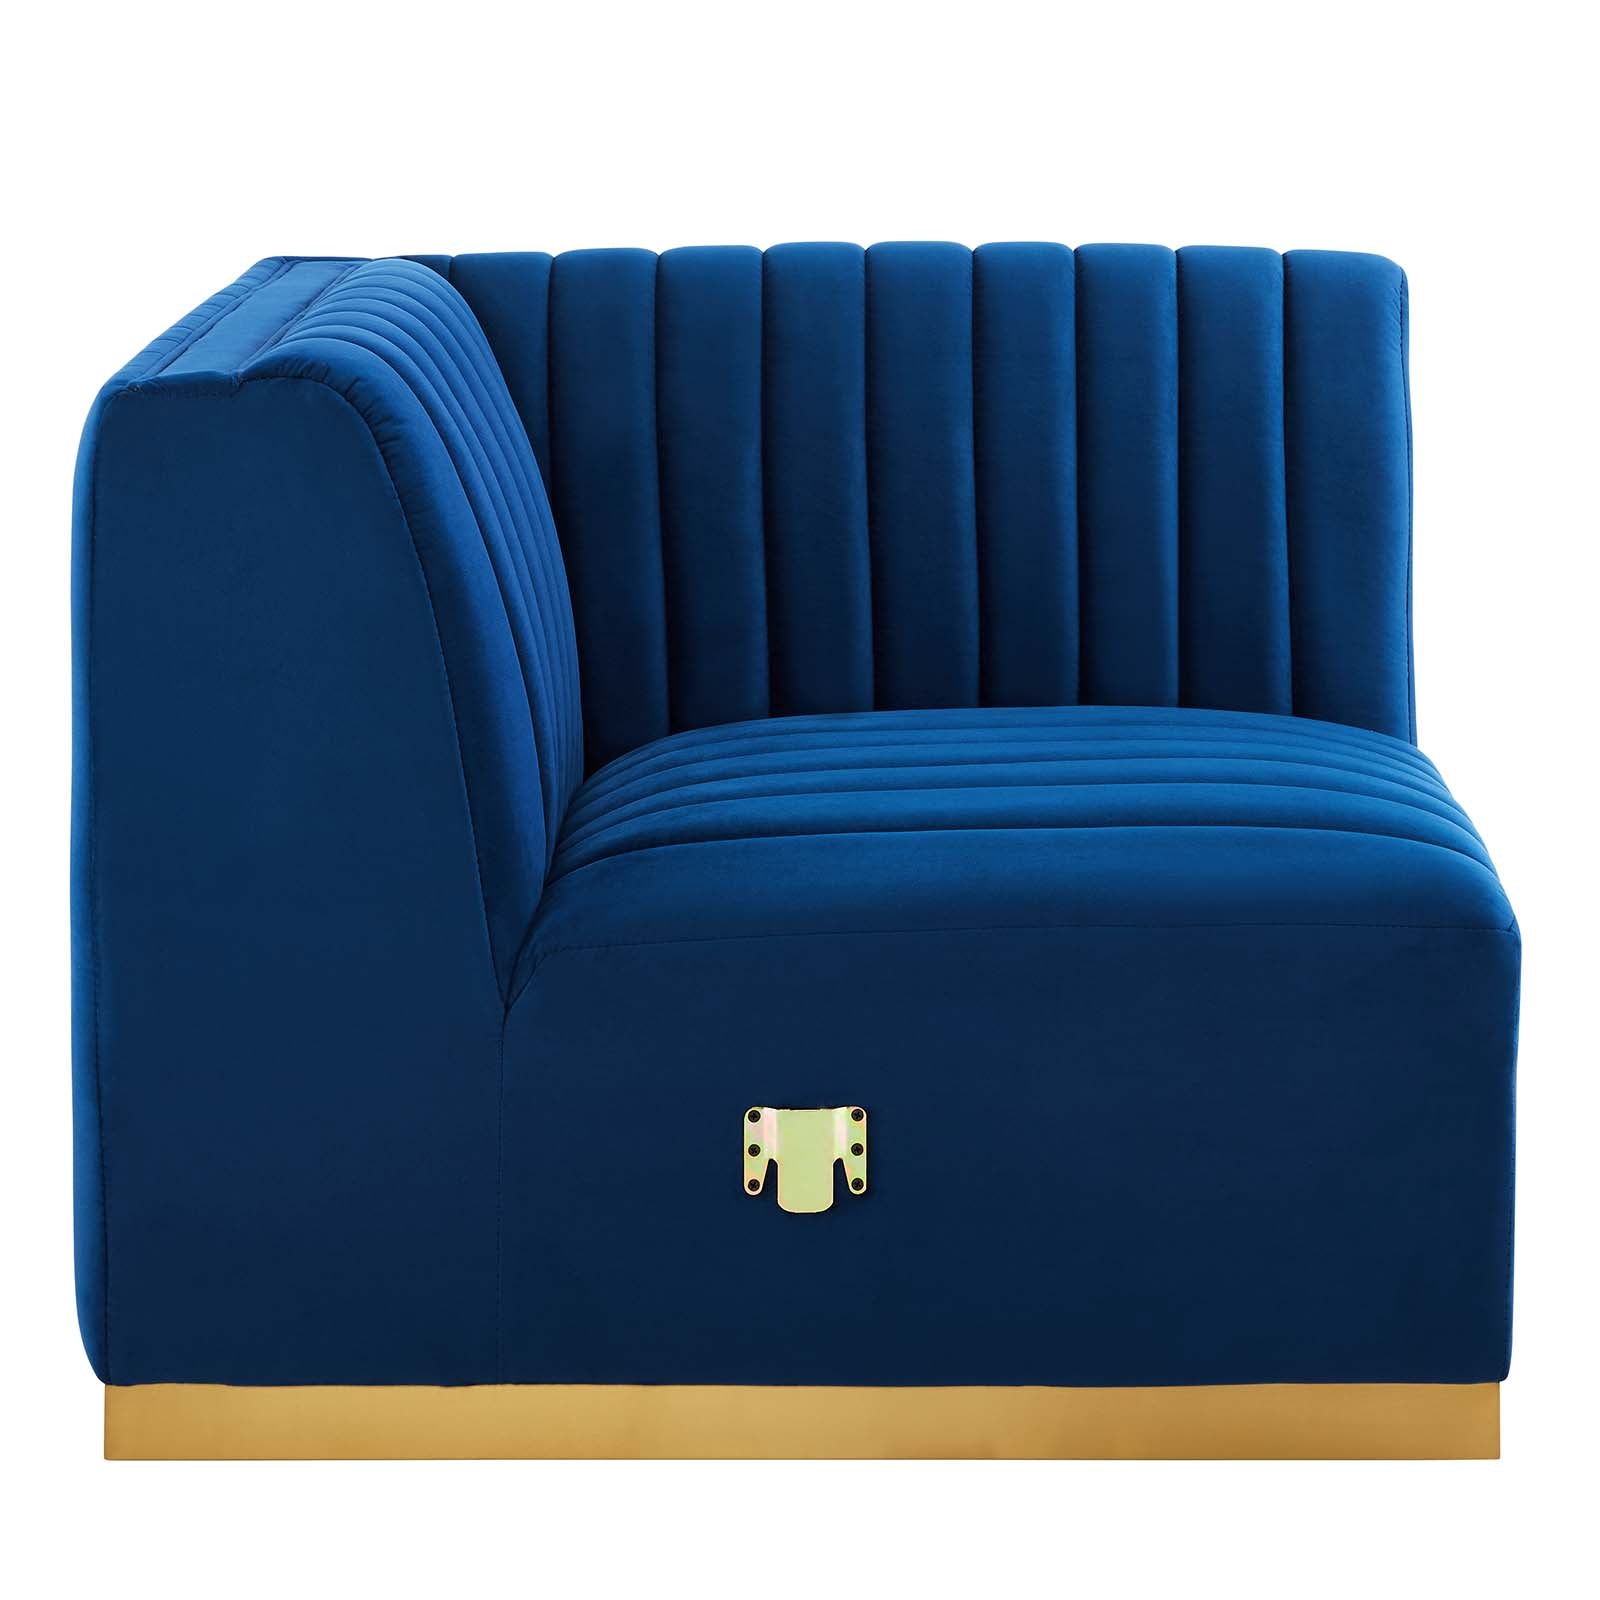 Modway Sectional Sofas - Conjure Channel Tufted Performance Velvet 6 Piece U-Shaped Sectional Gold Navy